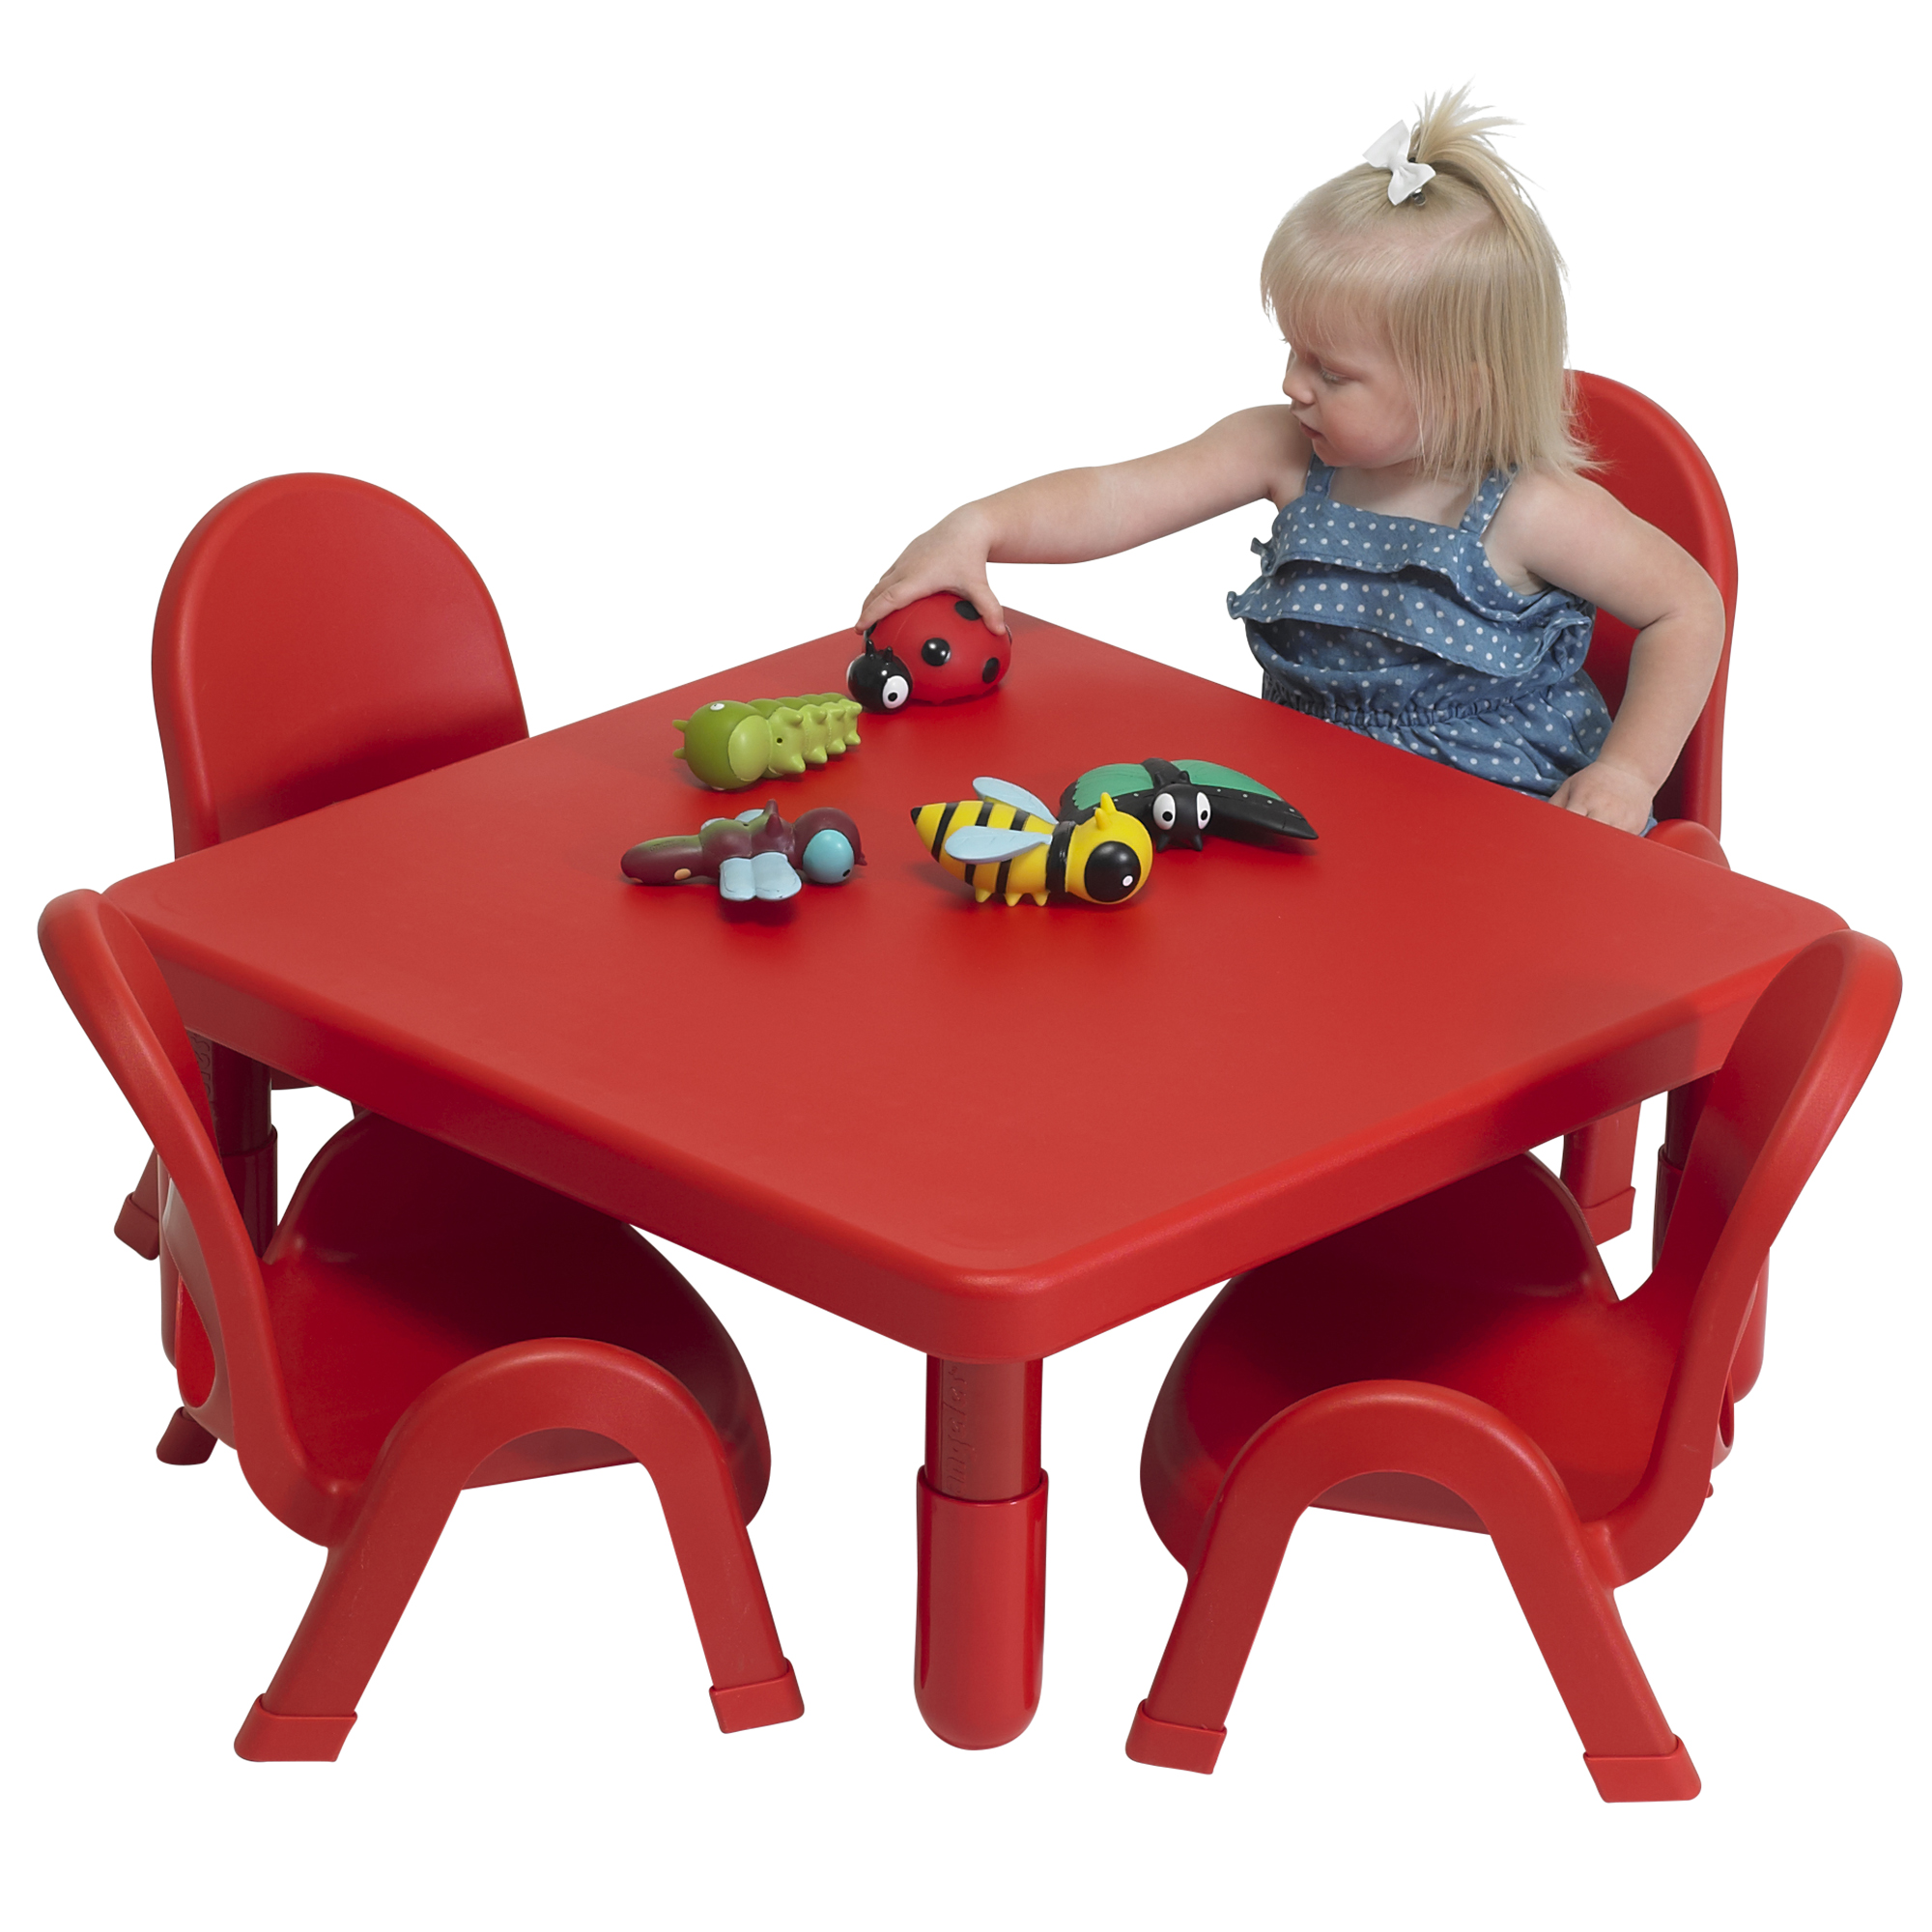 Toddler MyValue™ Set 4 Square - Candy Apple Red